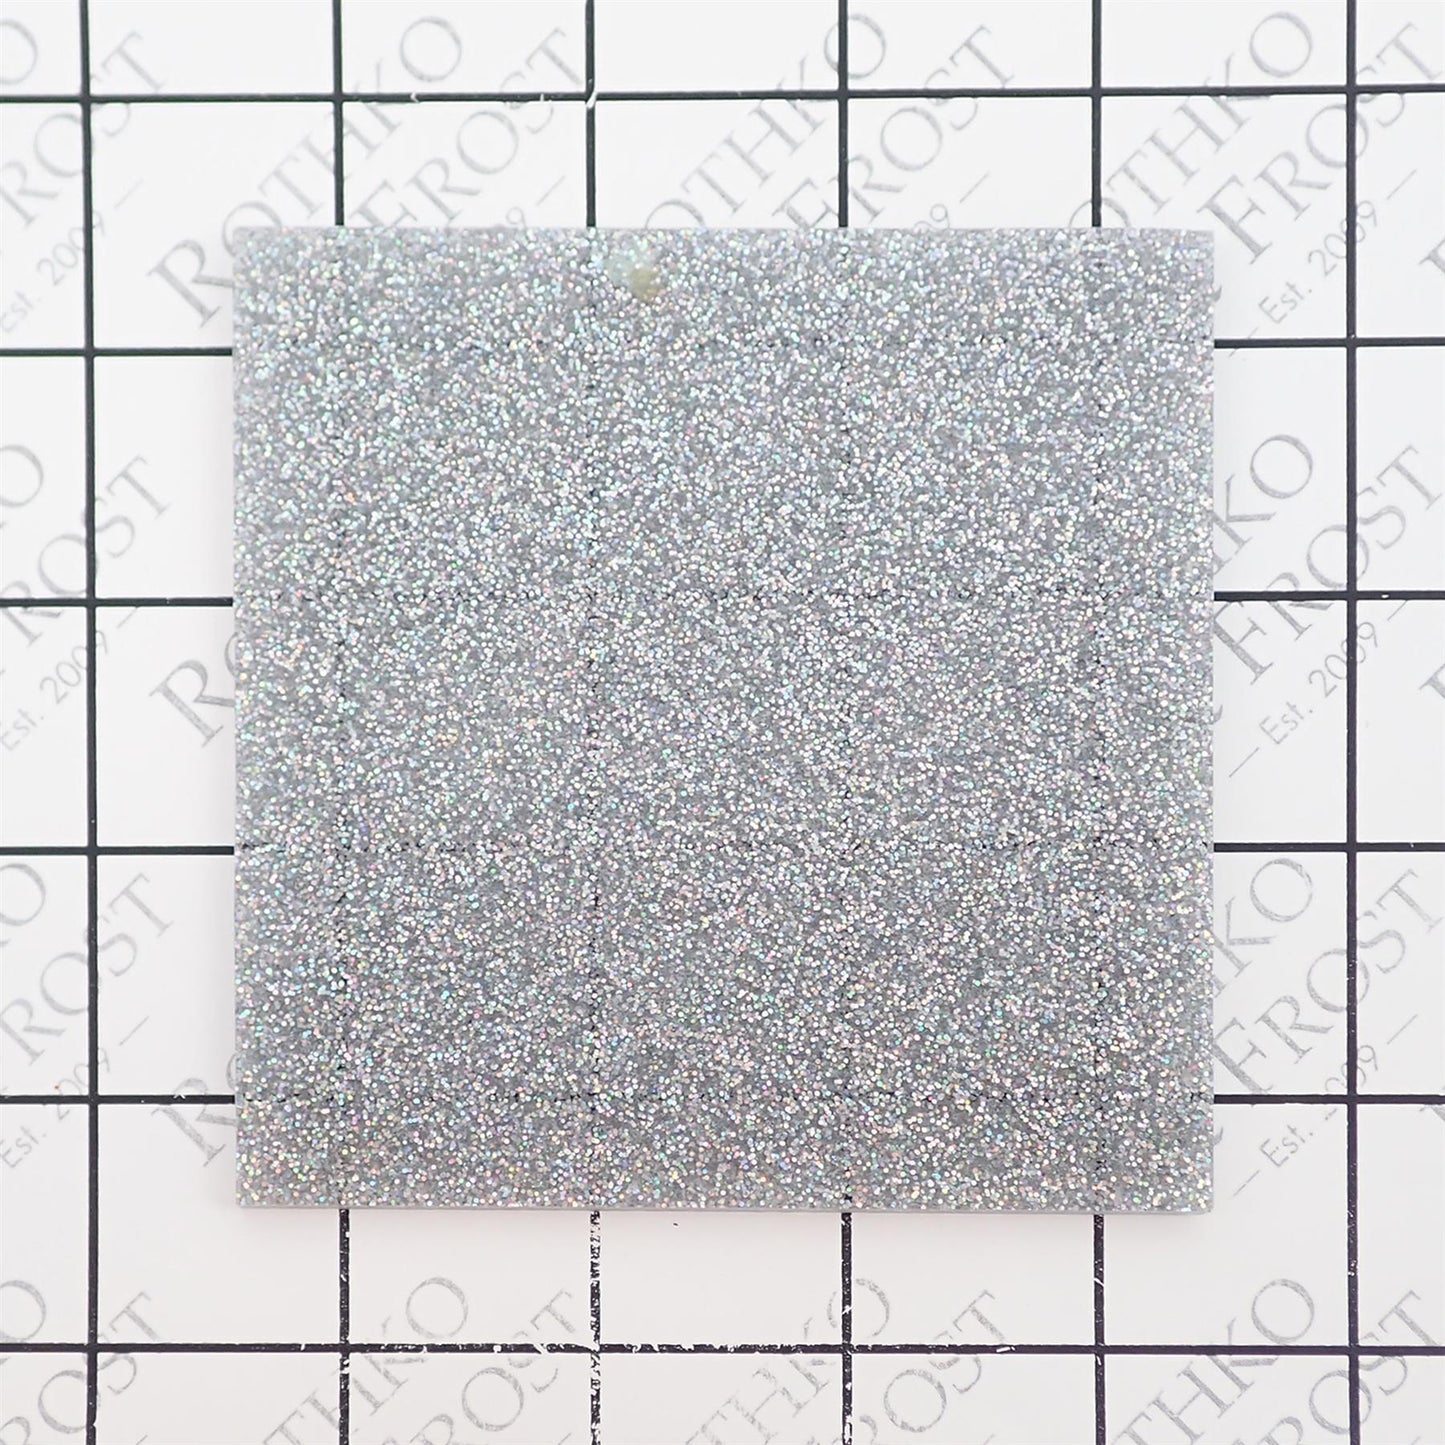 Incudo Silver 2-Sided Holographic Glitter Acrylic Sheet - 300x200x3mm (11.8x7.87x0.12")